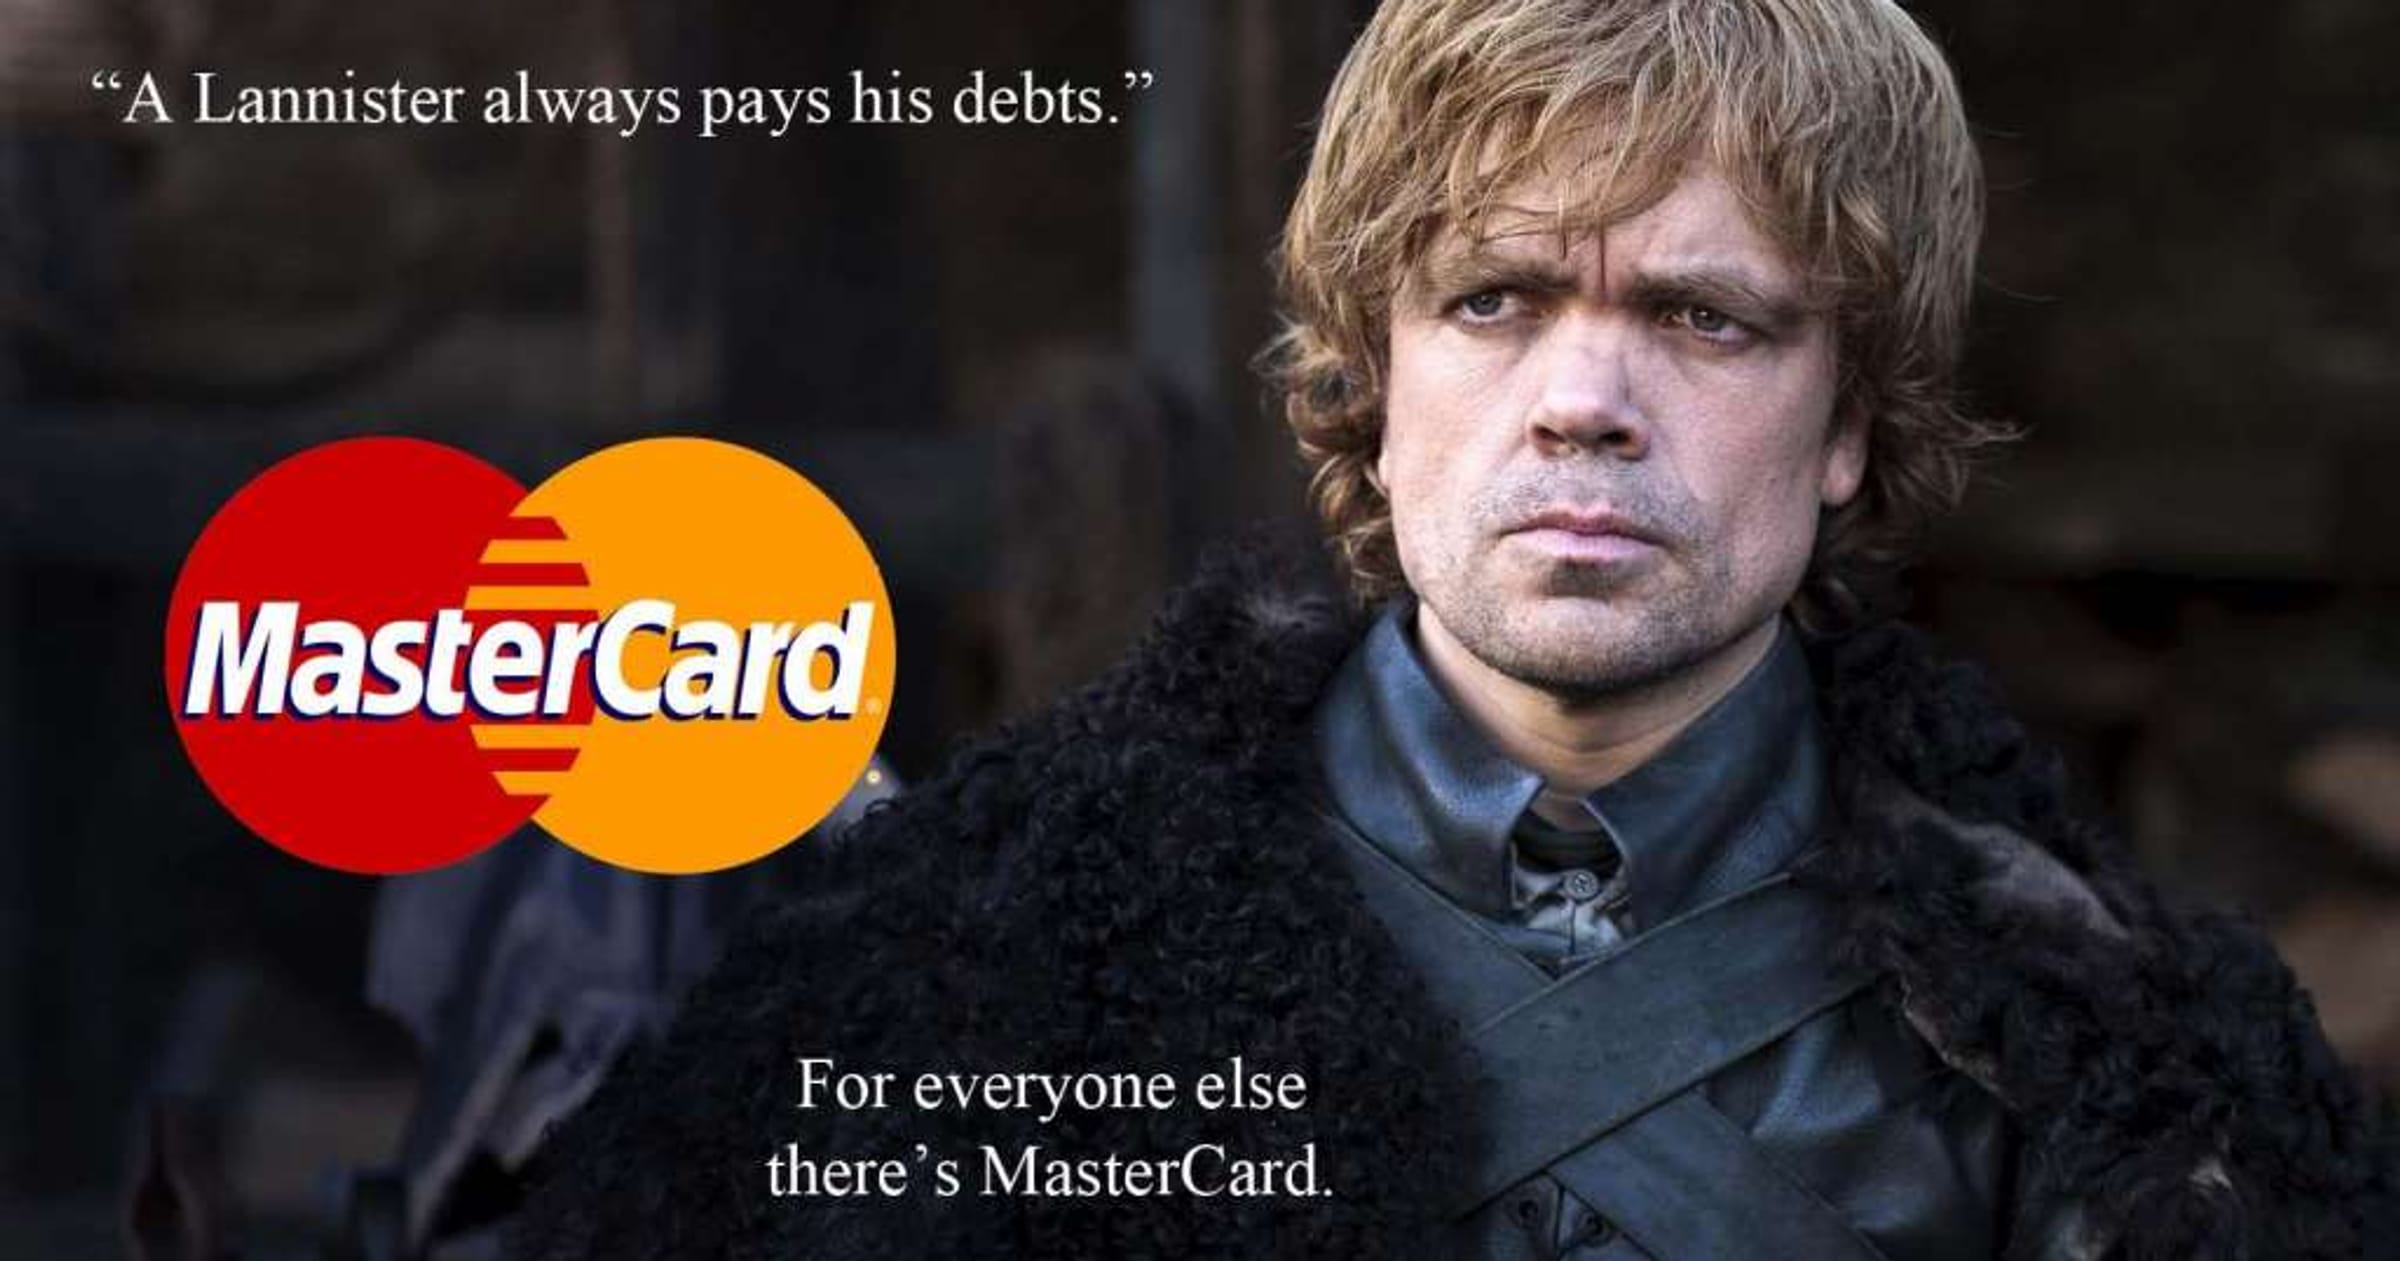 35 Best Game of Thrones Memes & Reacts to Use at the Office